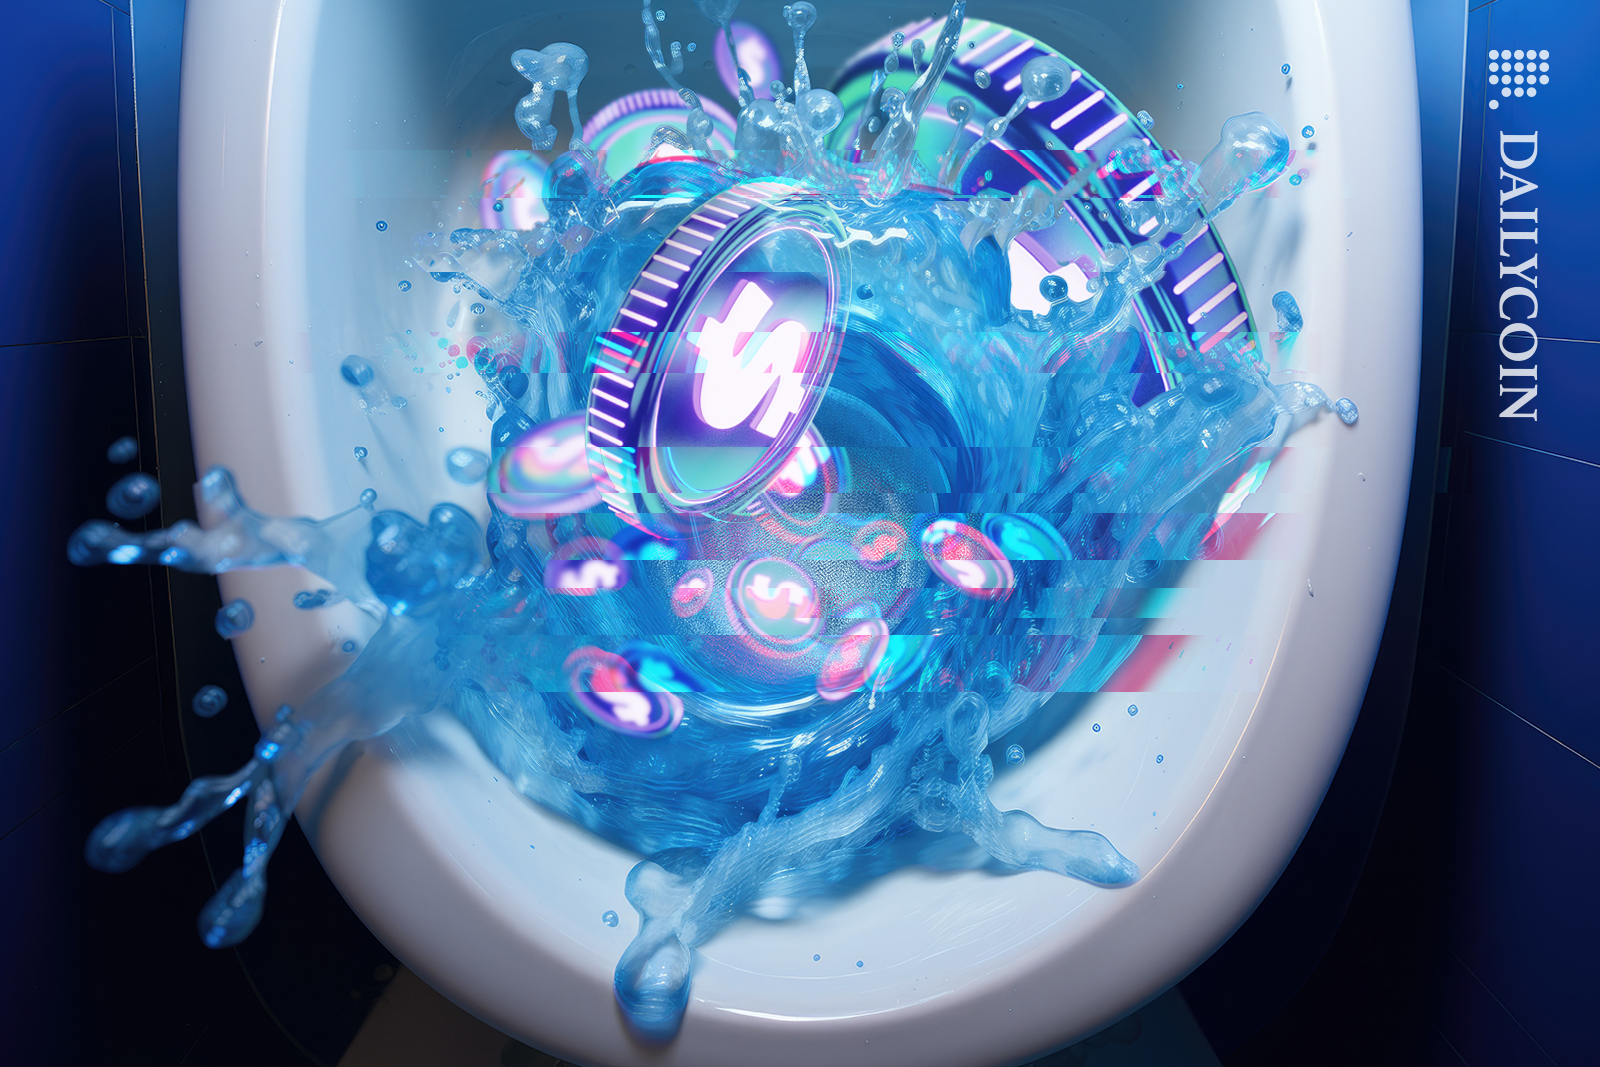 Digital Coins flushing down the toilet.